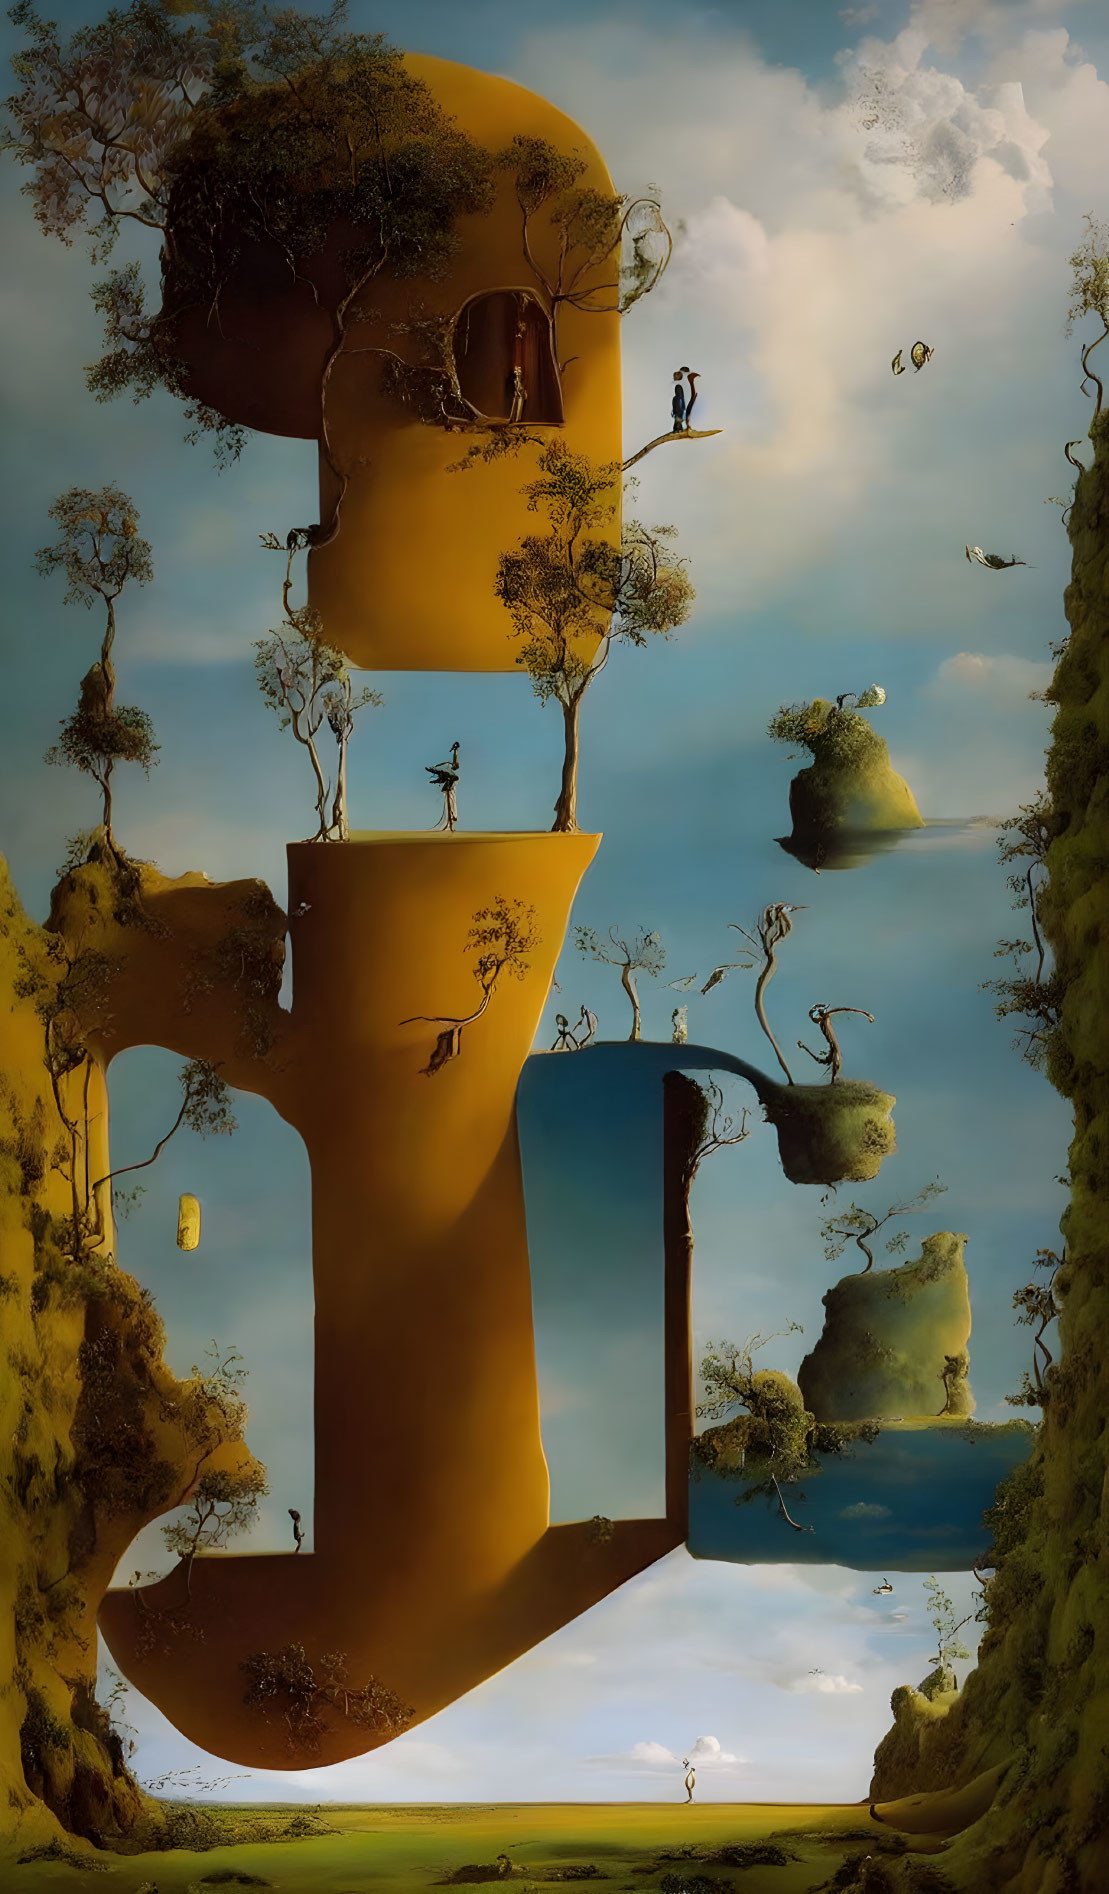 Surreal painting featuring inverted "E" shape, trees, figures, and floating islands on blue